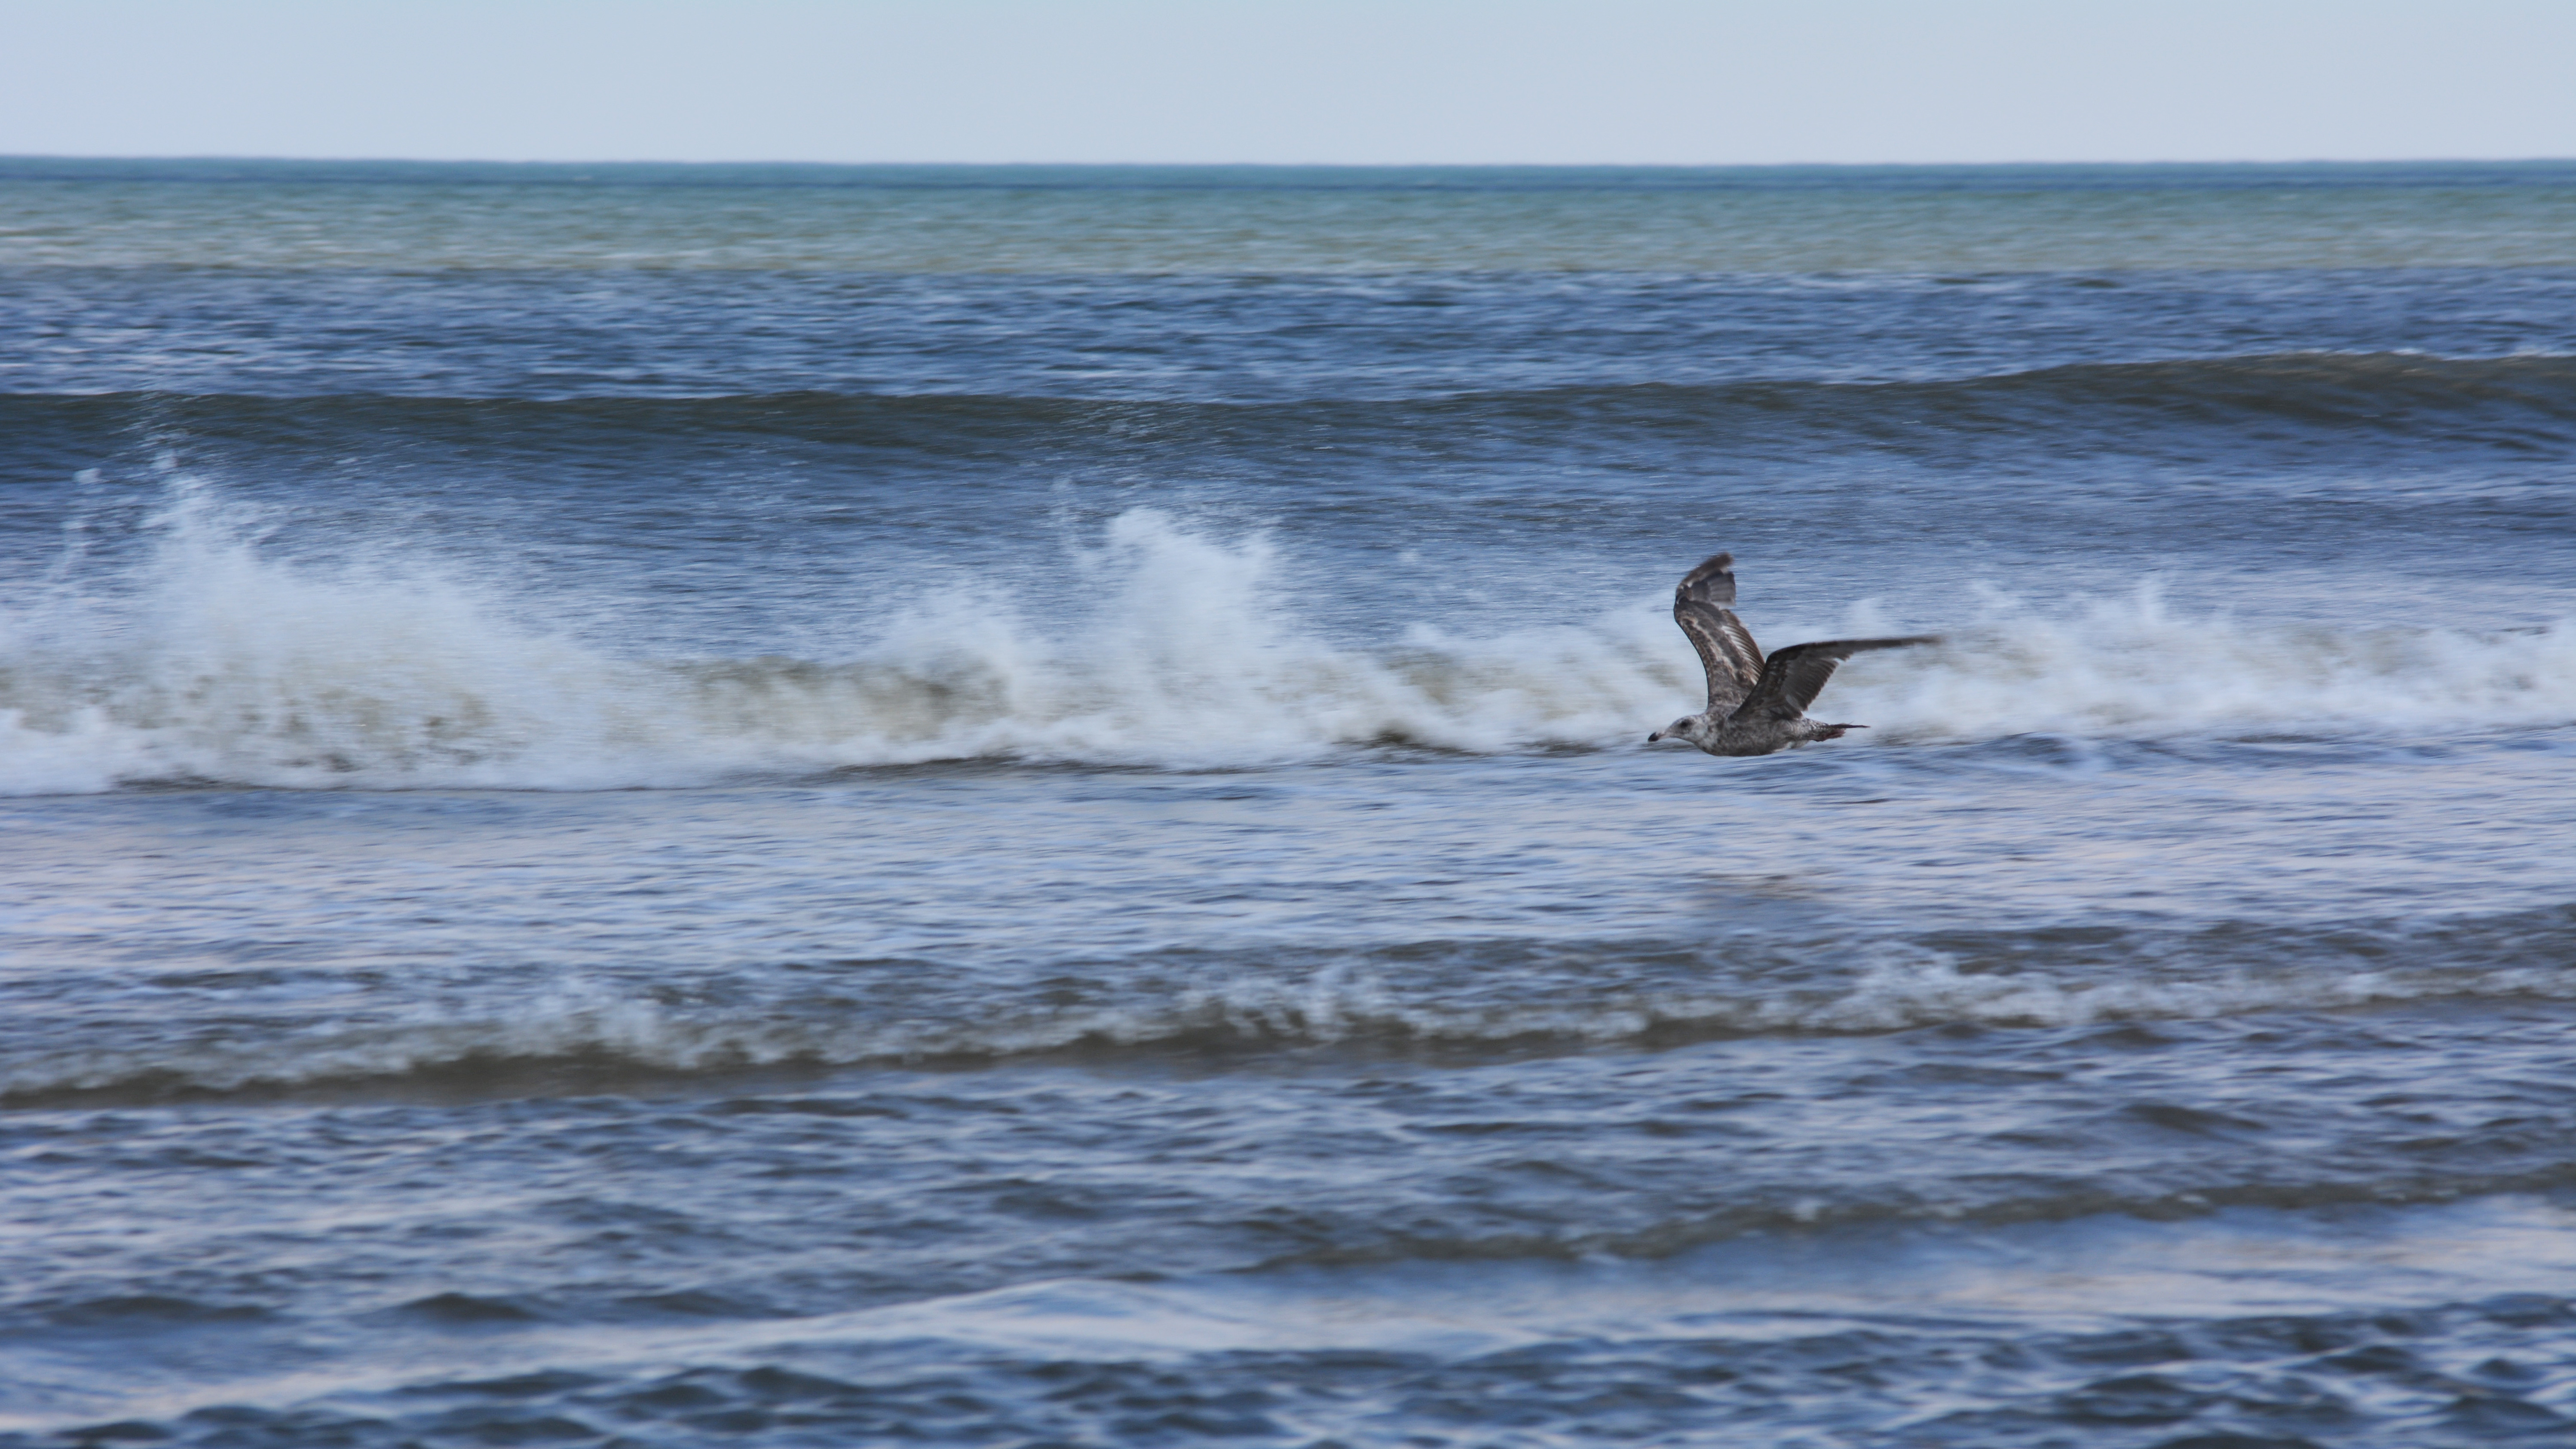 A seagull in flight with waves in the background